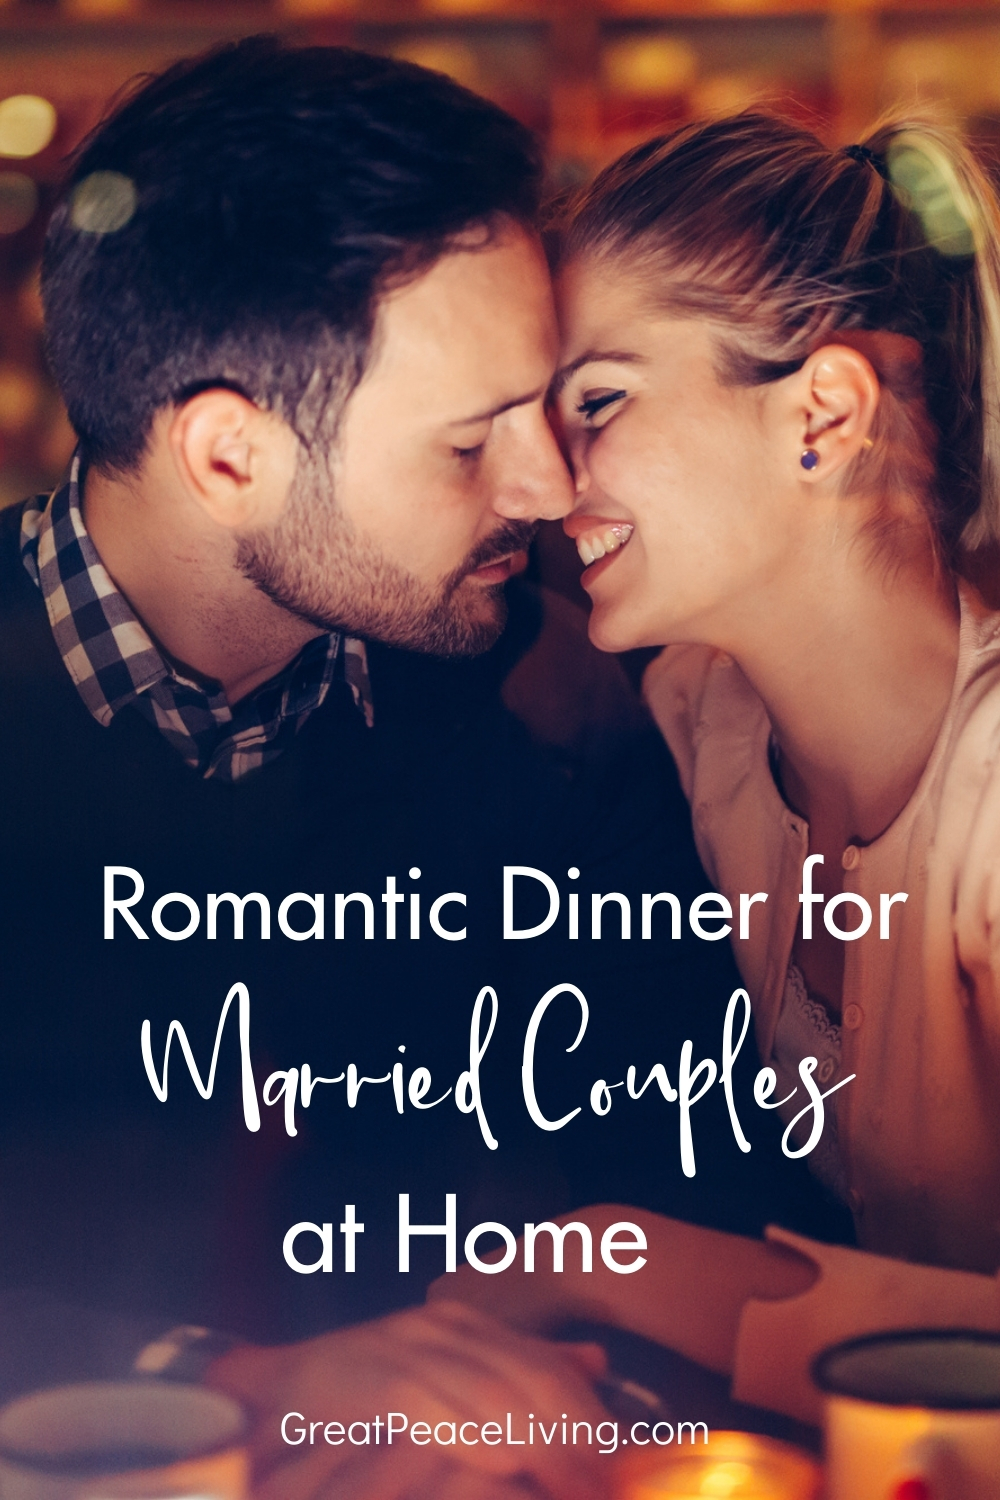 Romantic Dinner for Married Couples at Home